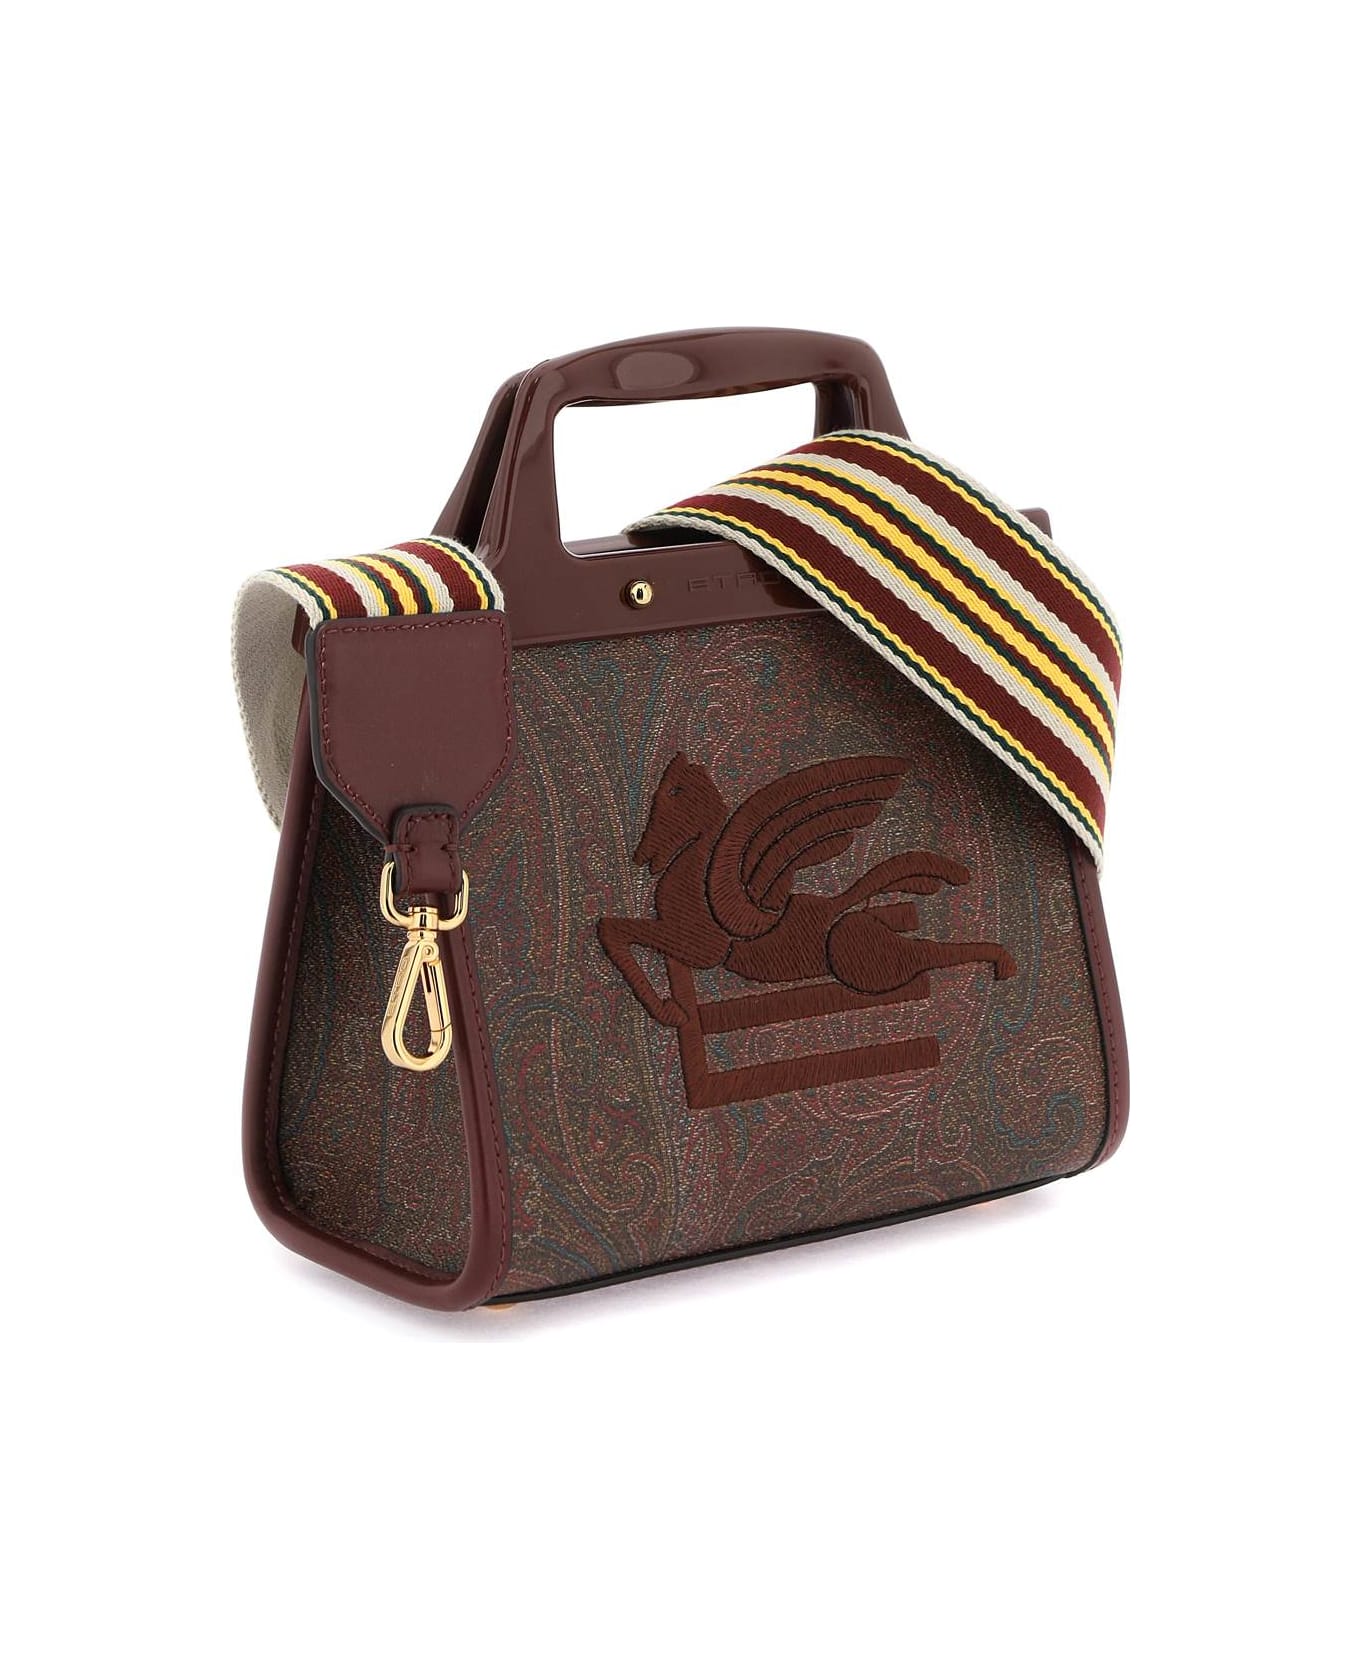 Etro 'love Trotter' Tote Bag - Brown トートバッグ